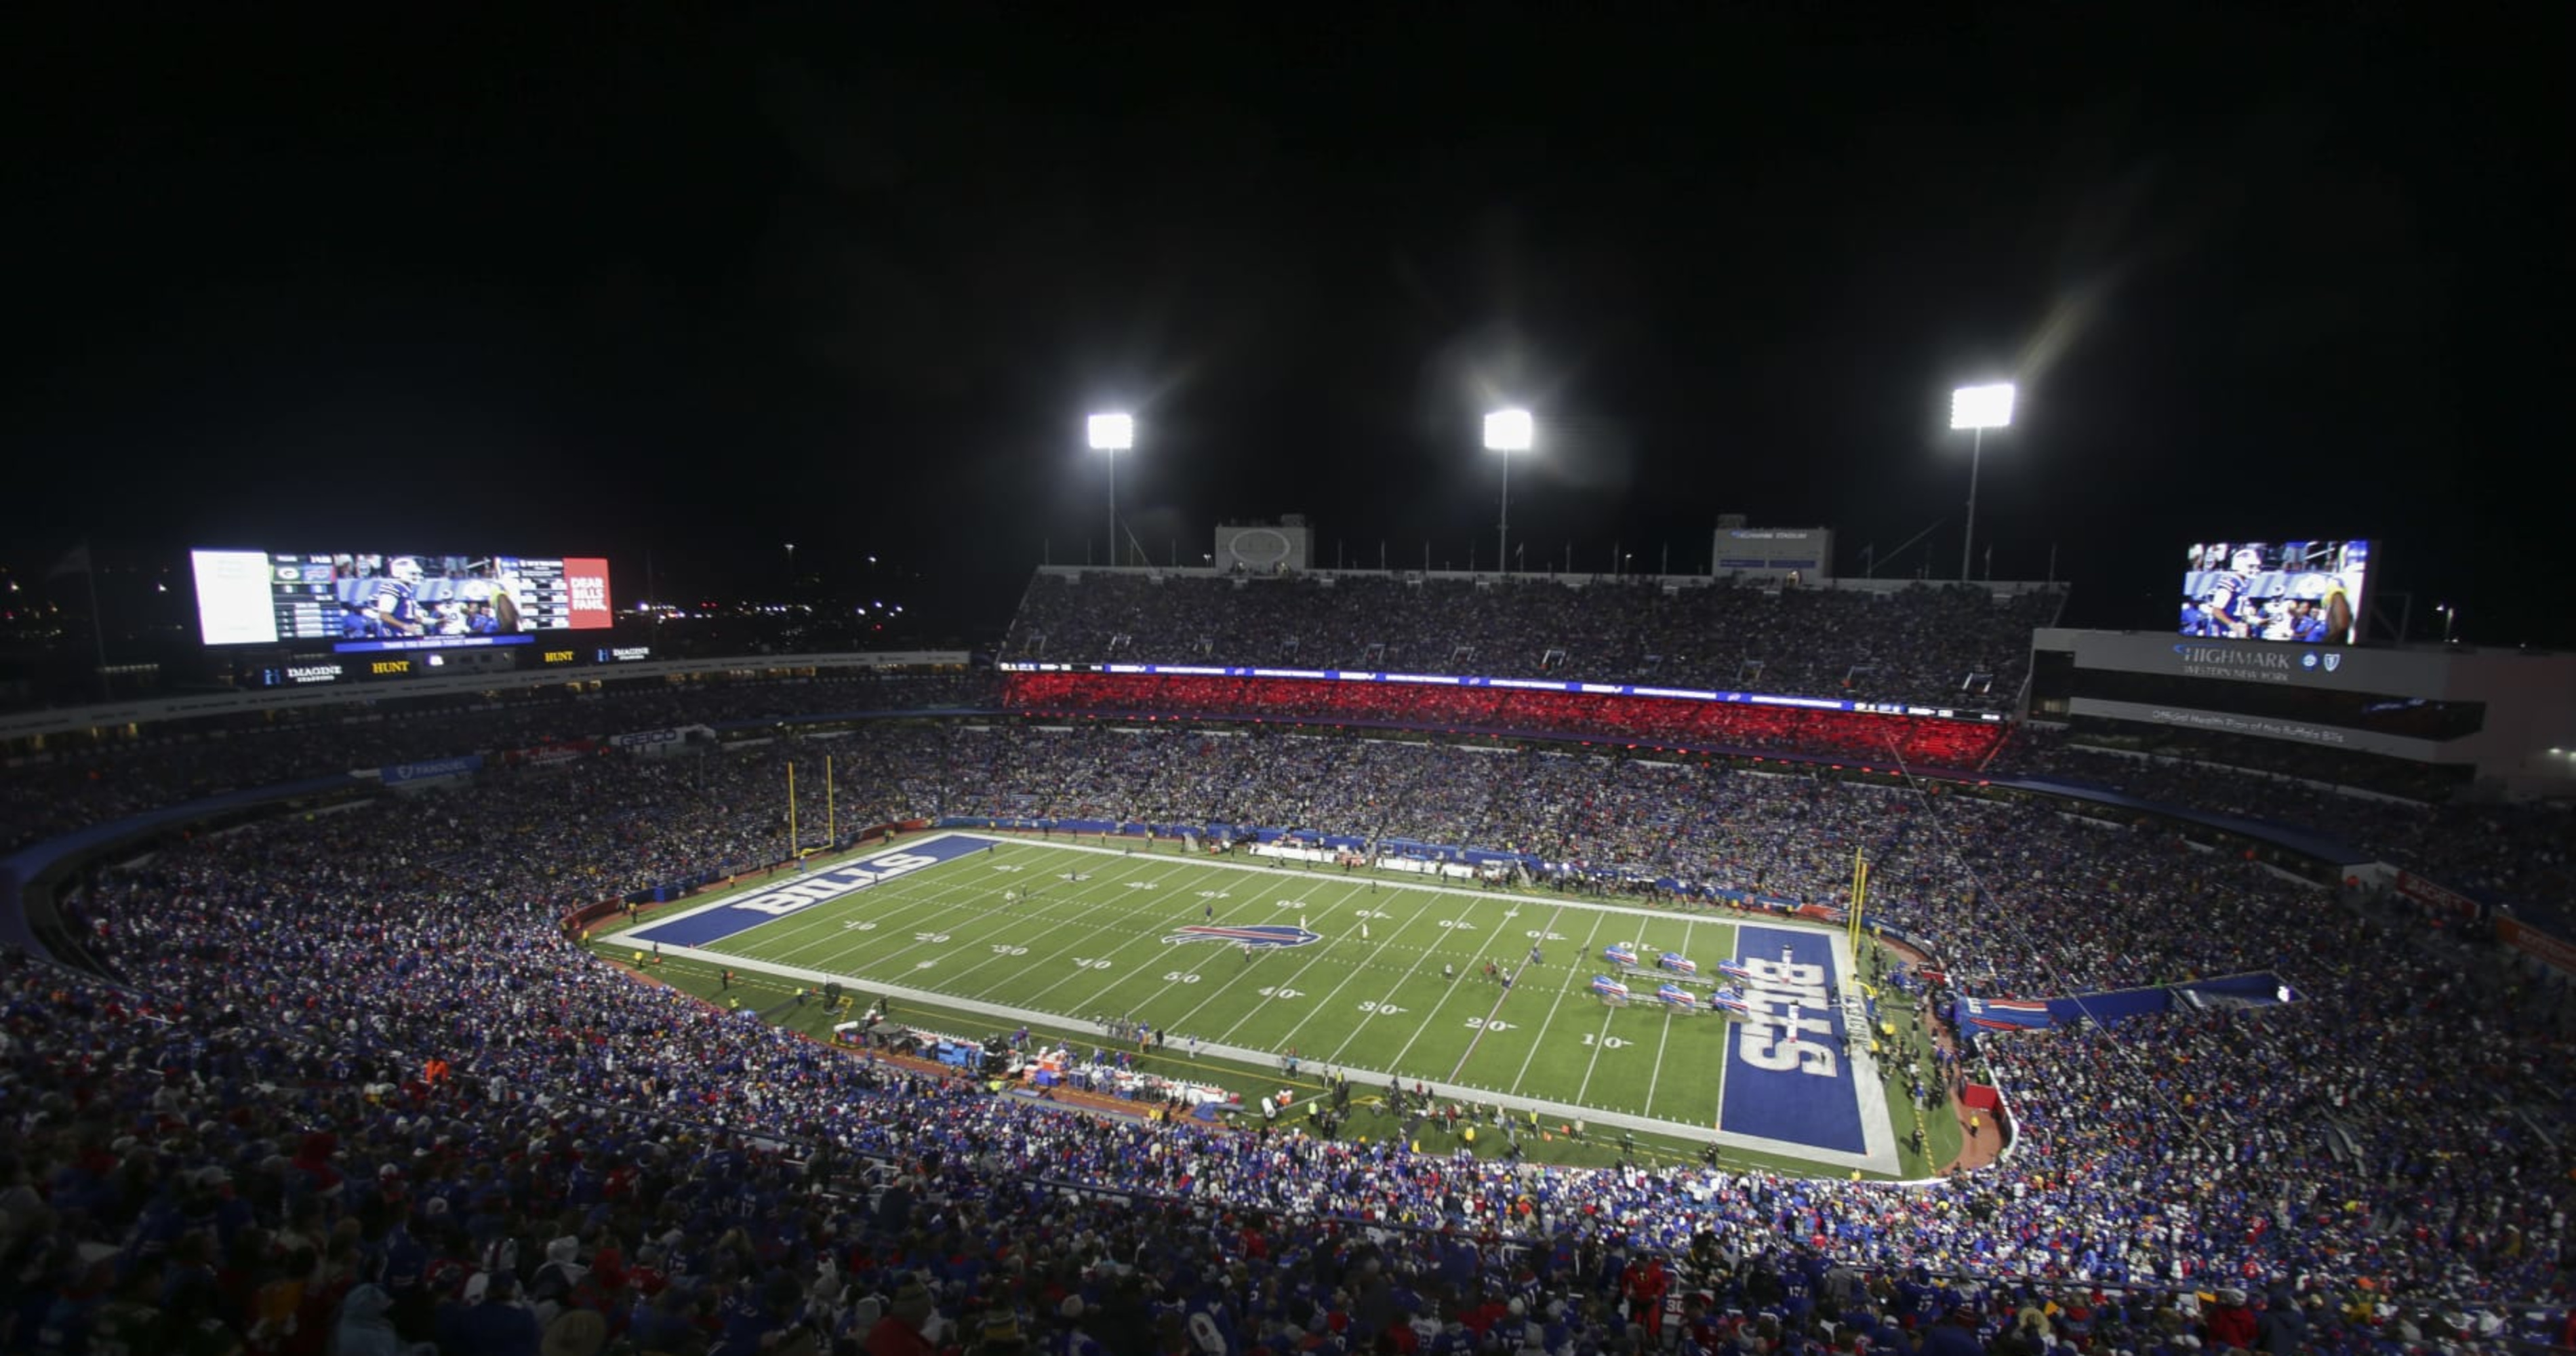 Windy conditions favor Bills in Monday Night Football game against